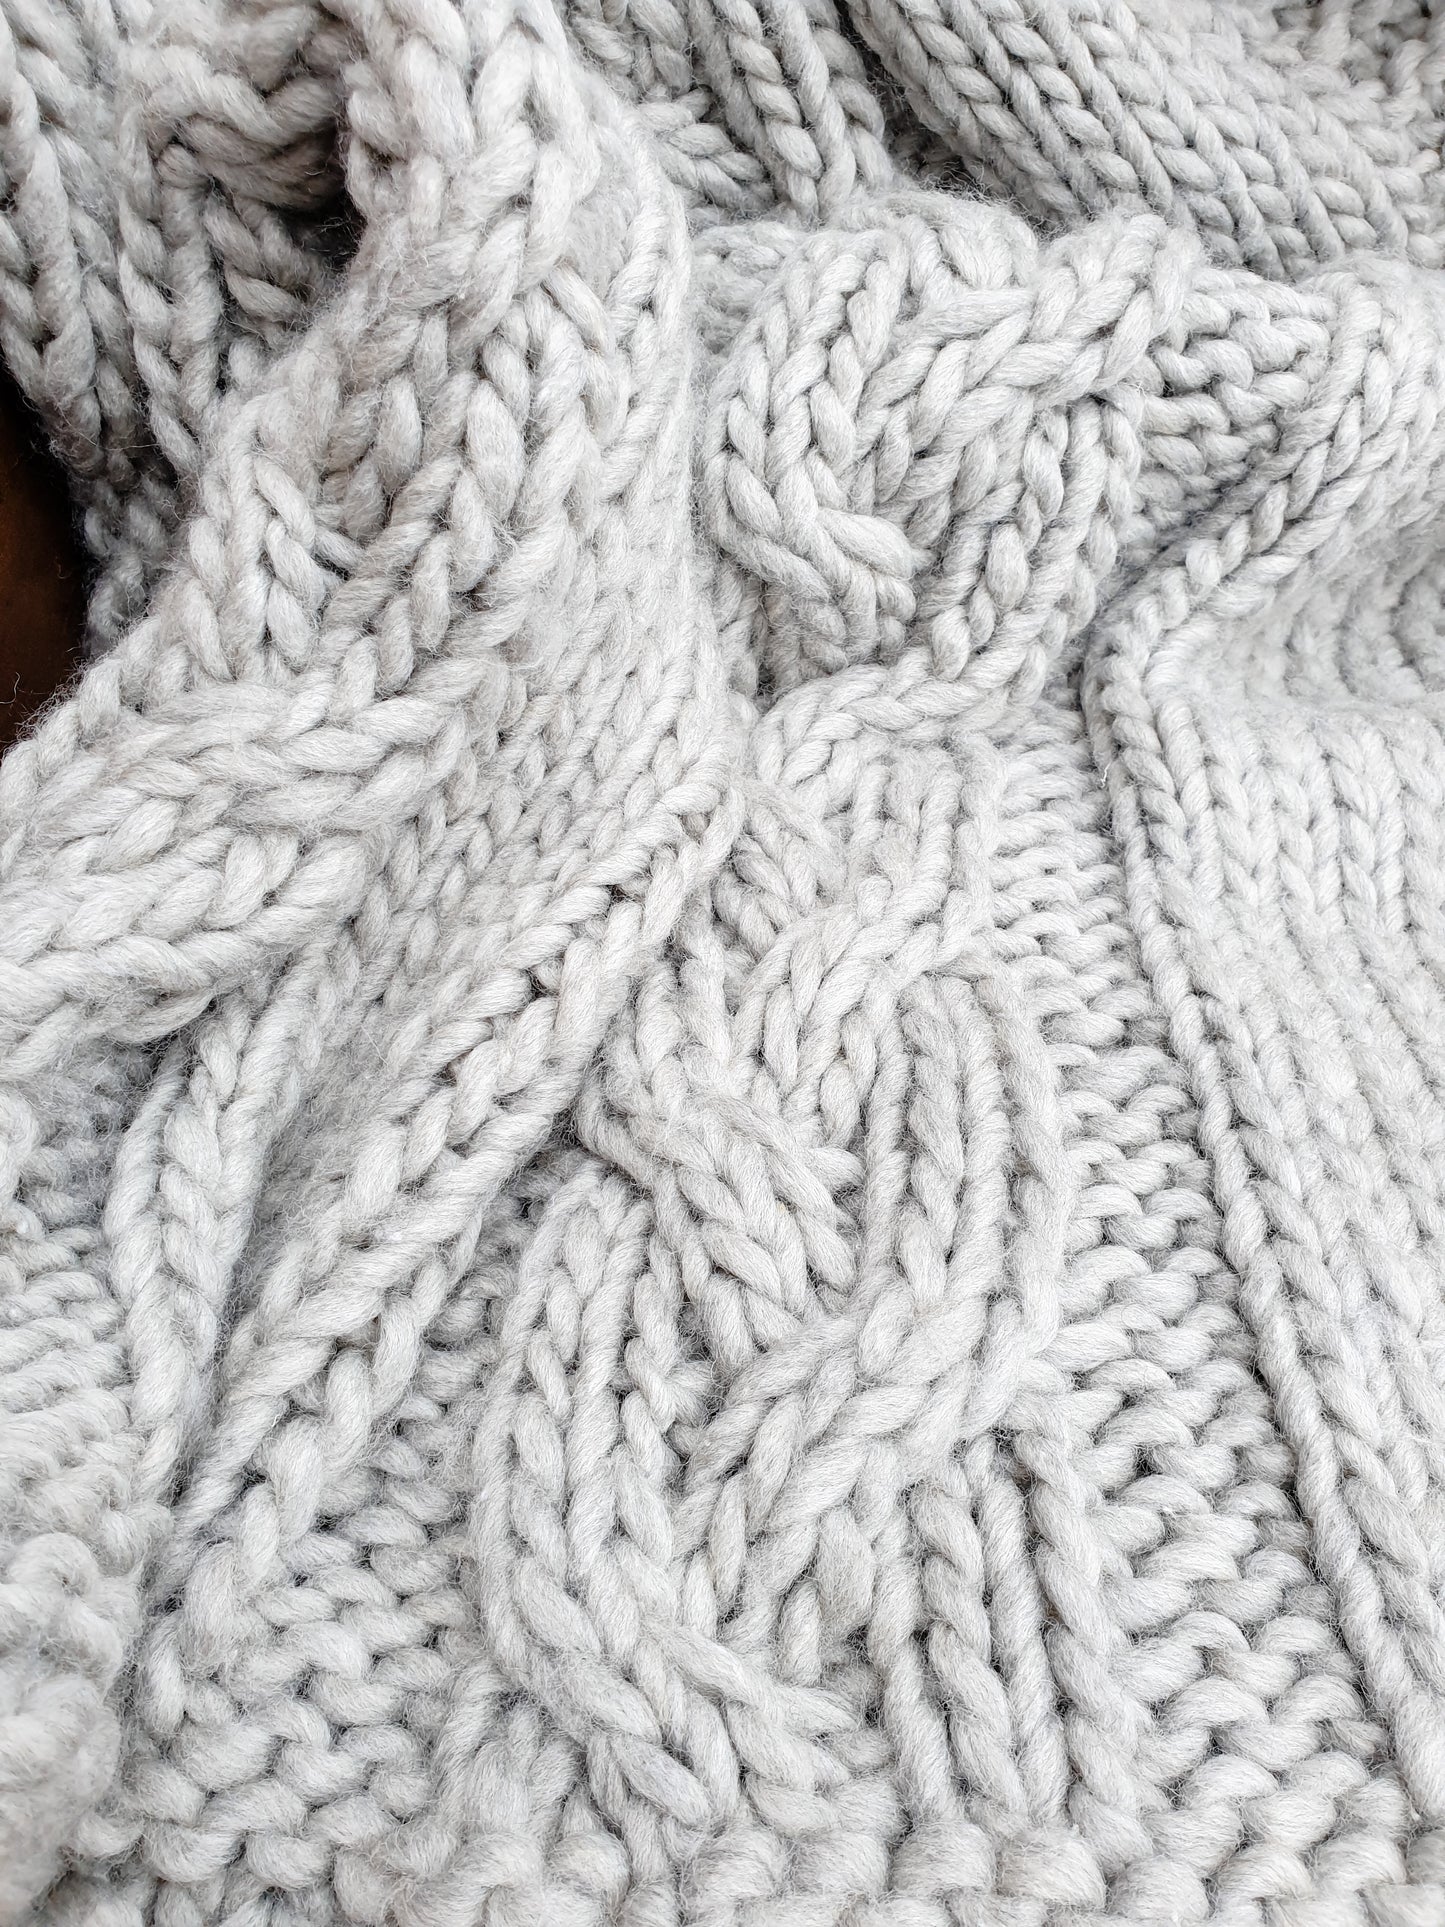 Detail of cable knit on grey throw blanket